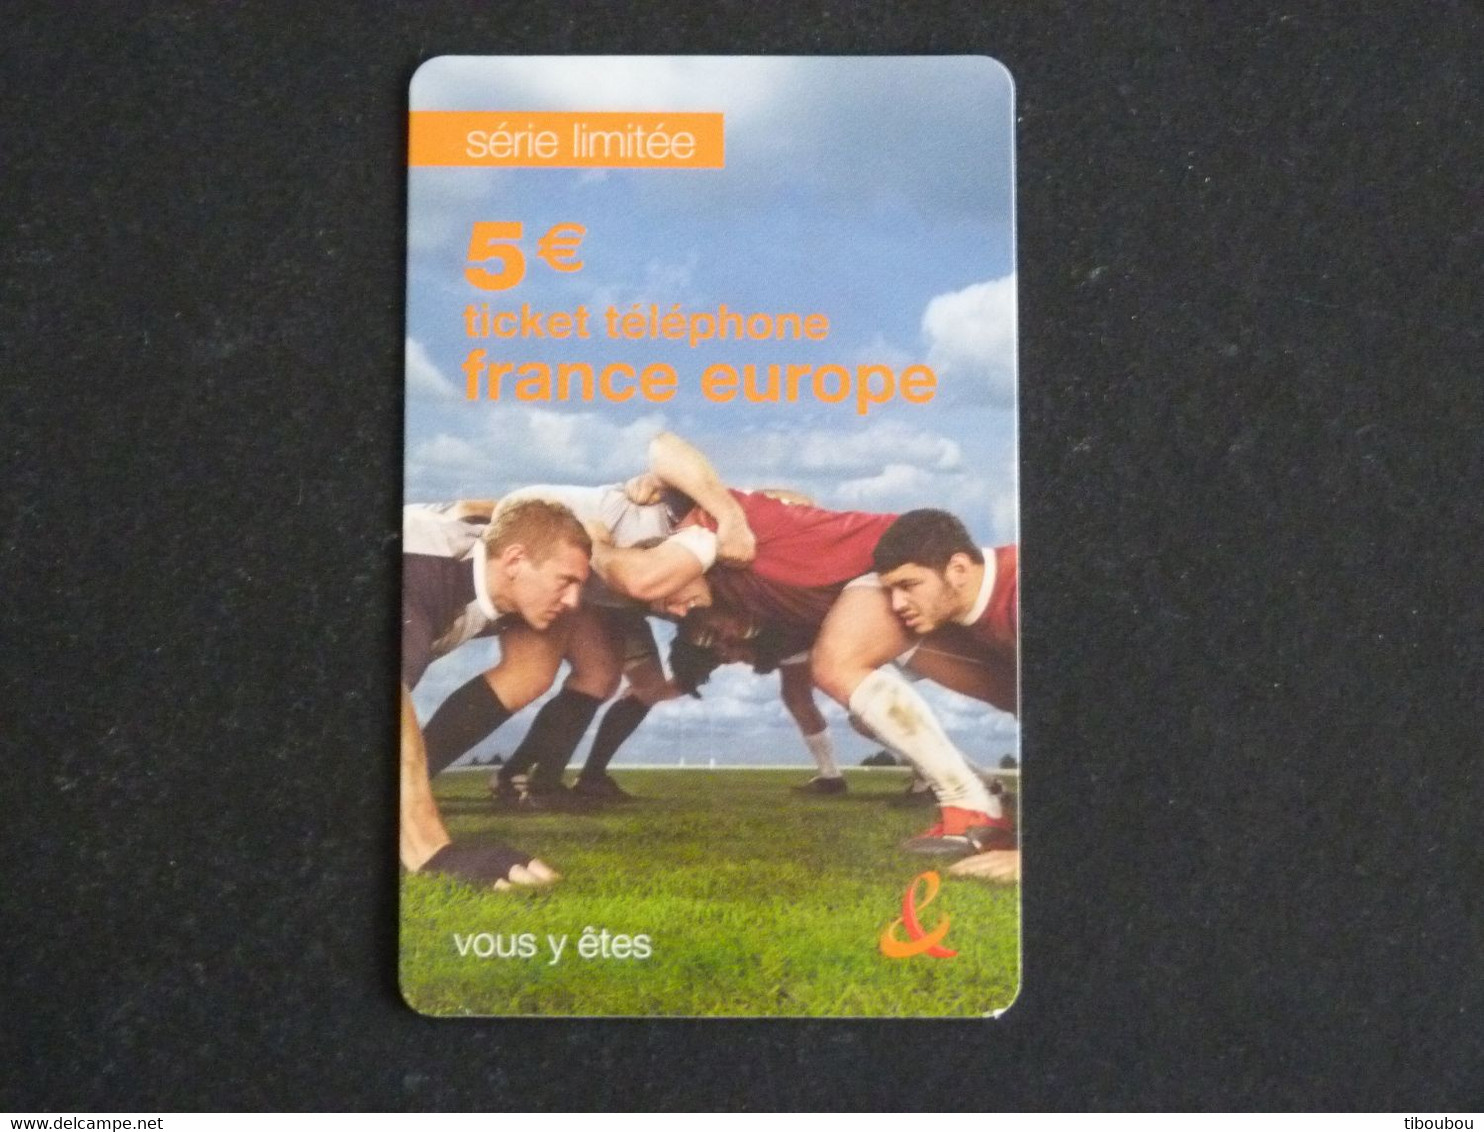 TELECARTE TICKET TELEPHONE FRANCE EUROPE 5 EUROS FRANCE TELECOM RUGBY - FT Tickets